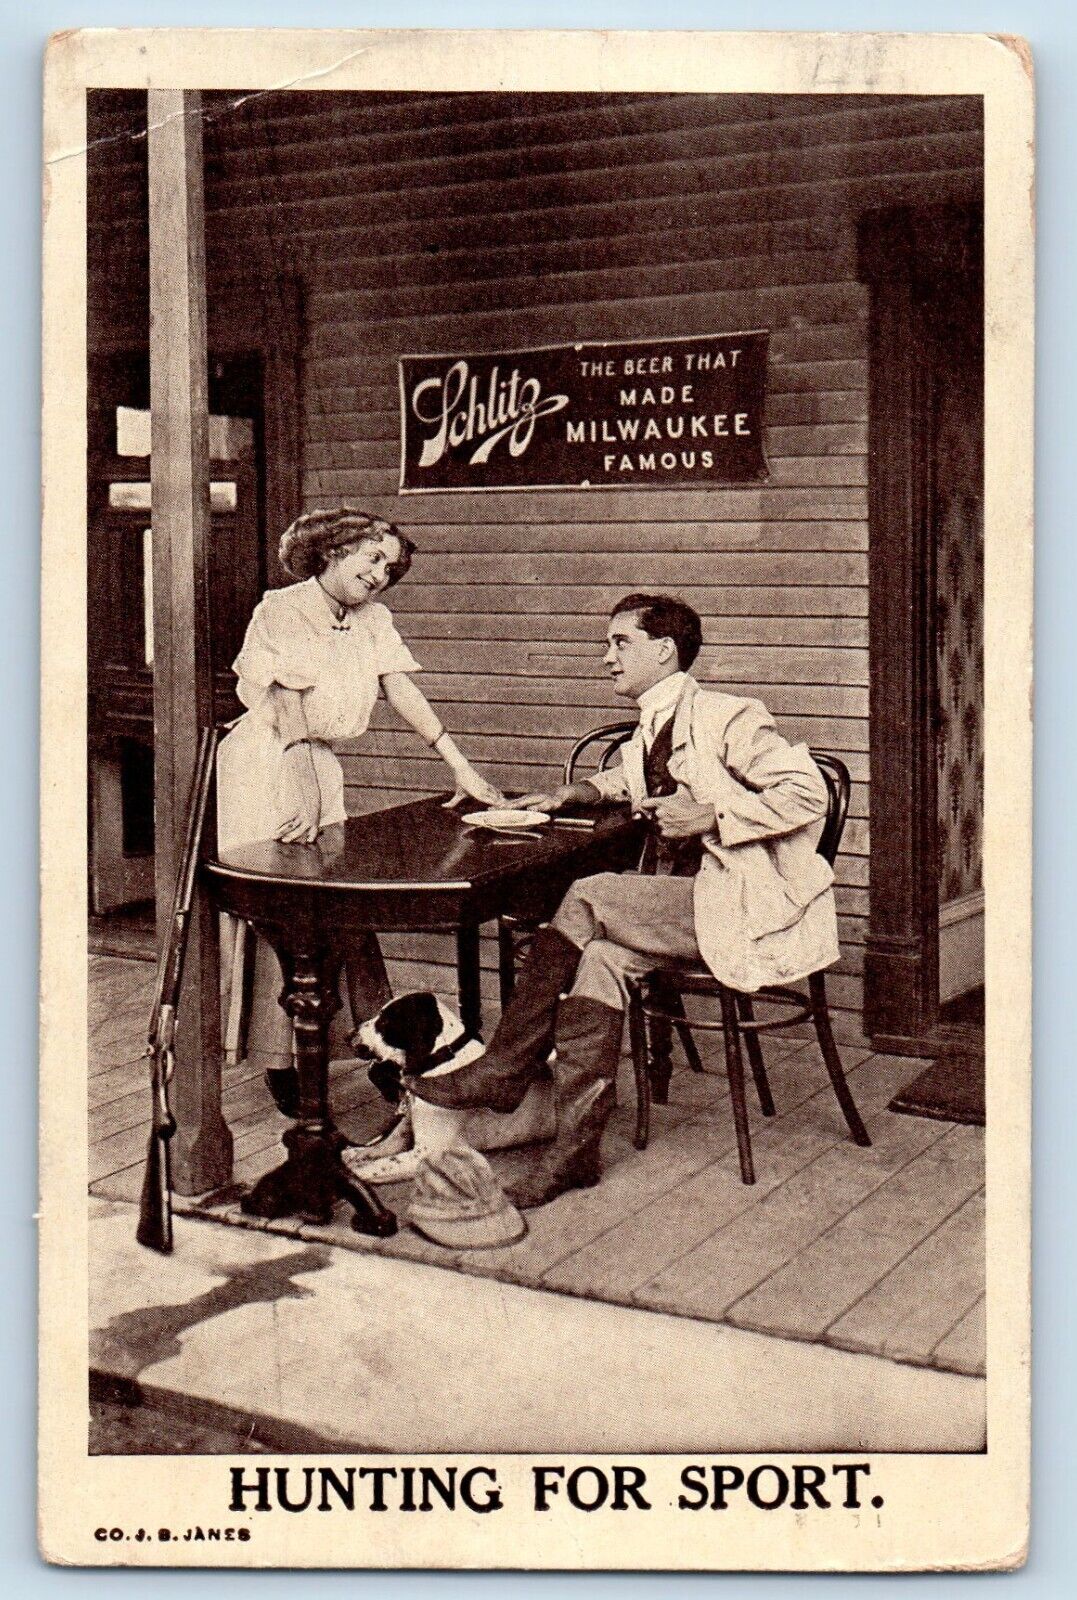 Virginia MN Postcard Schlitz Beer Hunting For Sport Made Milwaukee Famous